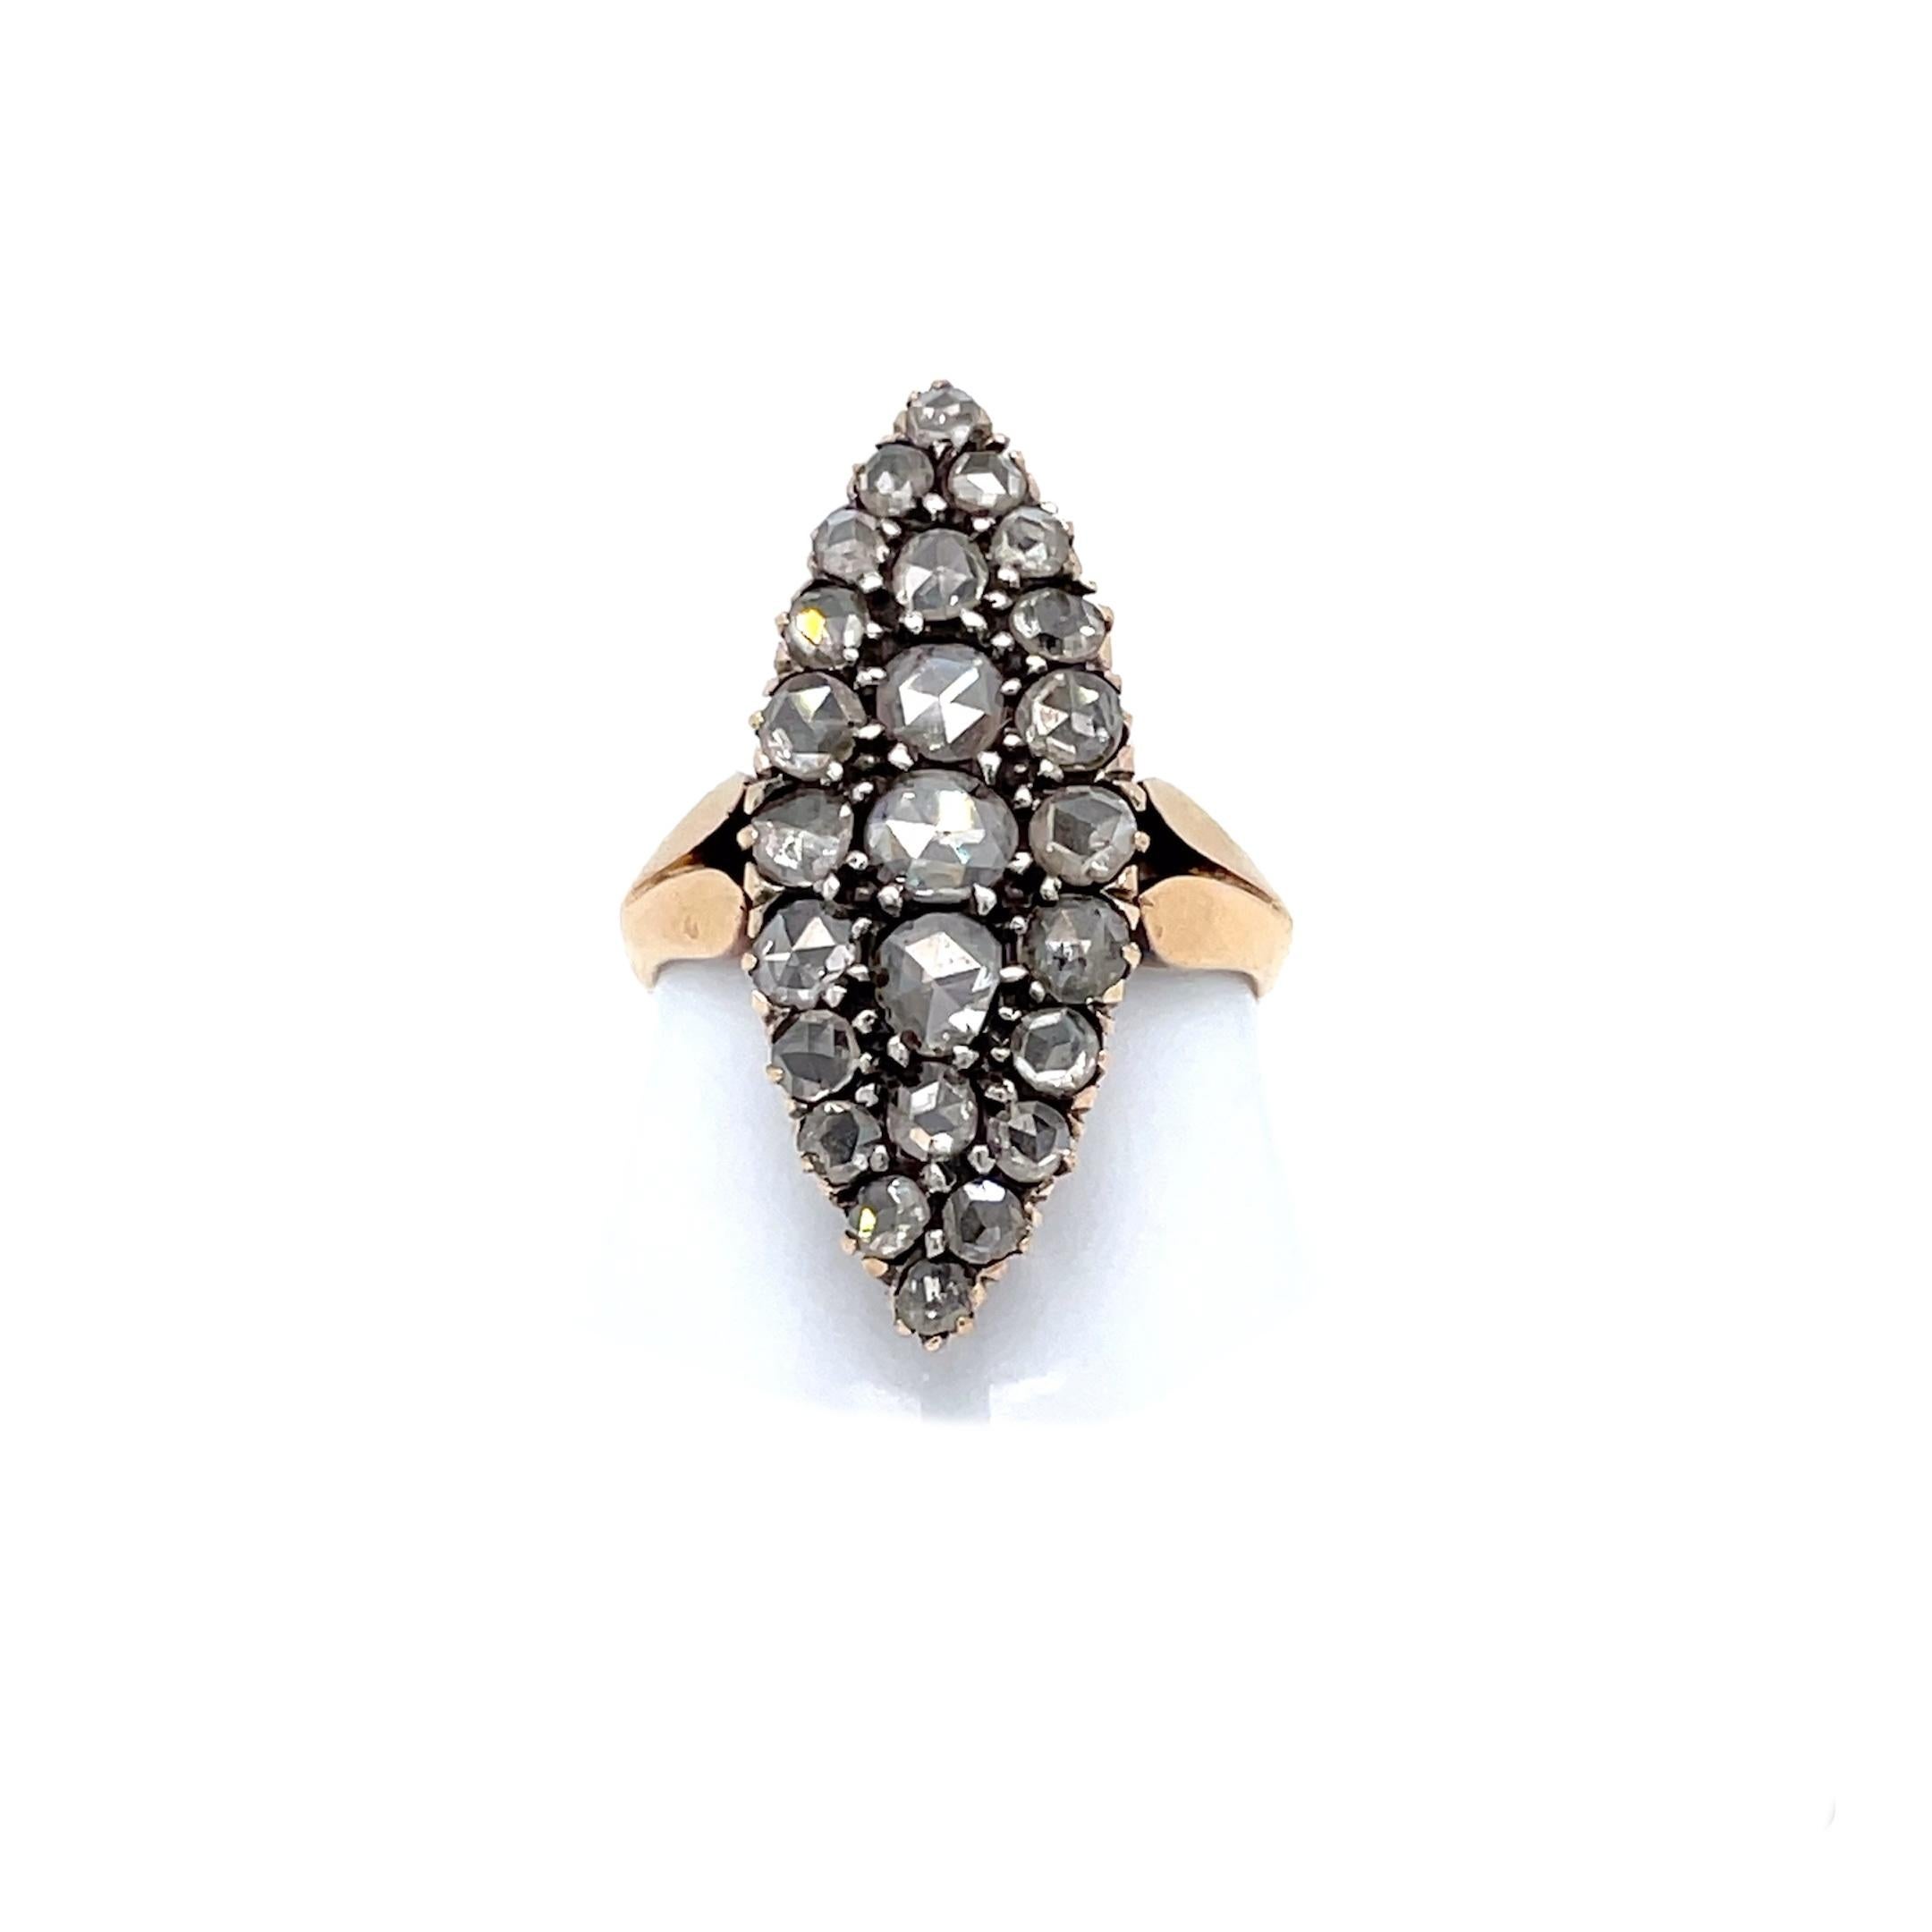 Beautiful 18k Gold and Silver handmade genuine Belle Époque ring.
Features three rows of Rose Cut diamonds, total weight 1.60 ct. color graded VS/SI clarity I/J color.

Circa 1900'

CONDITION: Pre-owned - Excellent 
METAL: 18 k gold and silver
RING